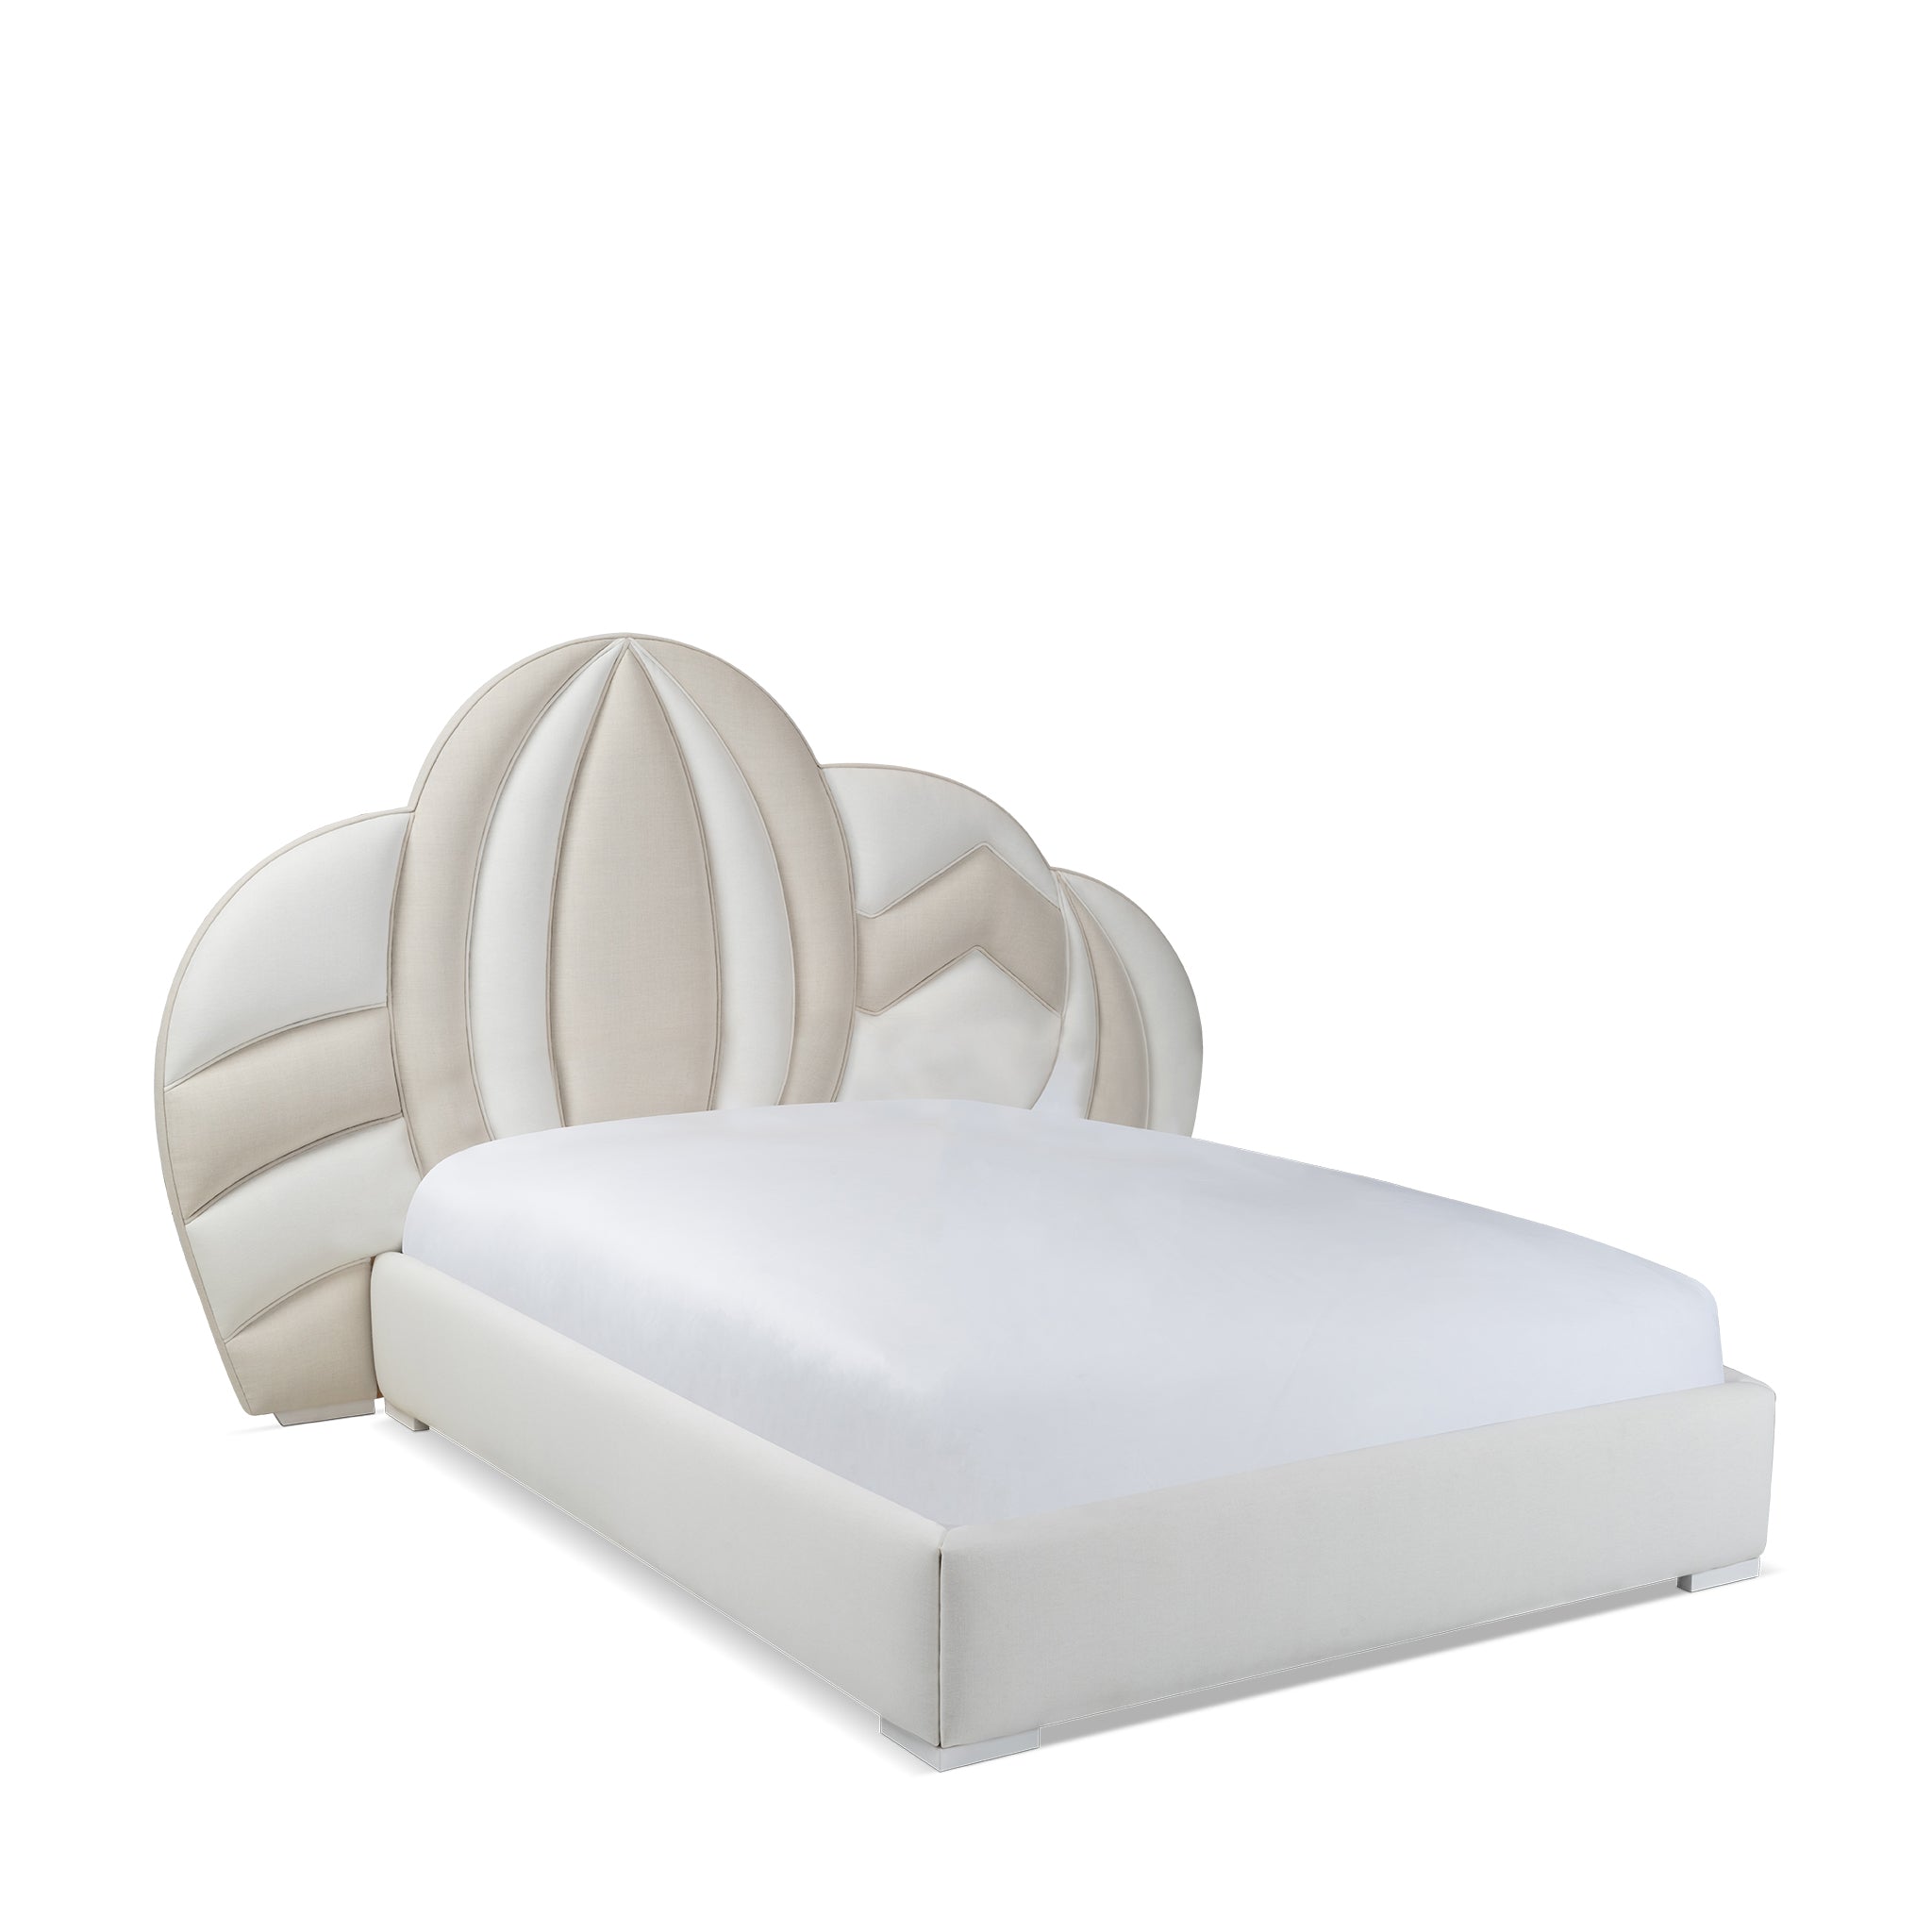 HOT AIR BALLOON BED US QUEEN SIZE